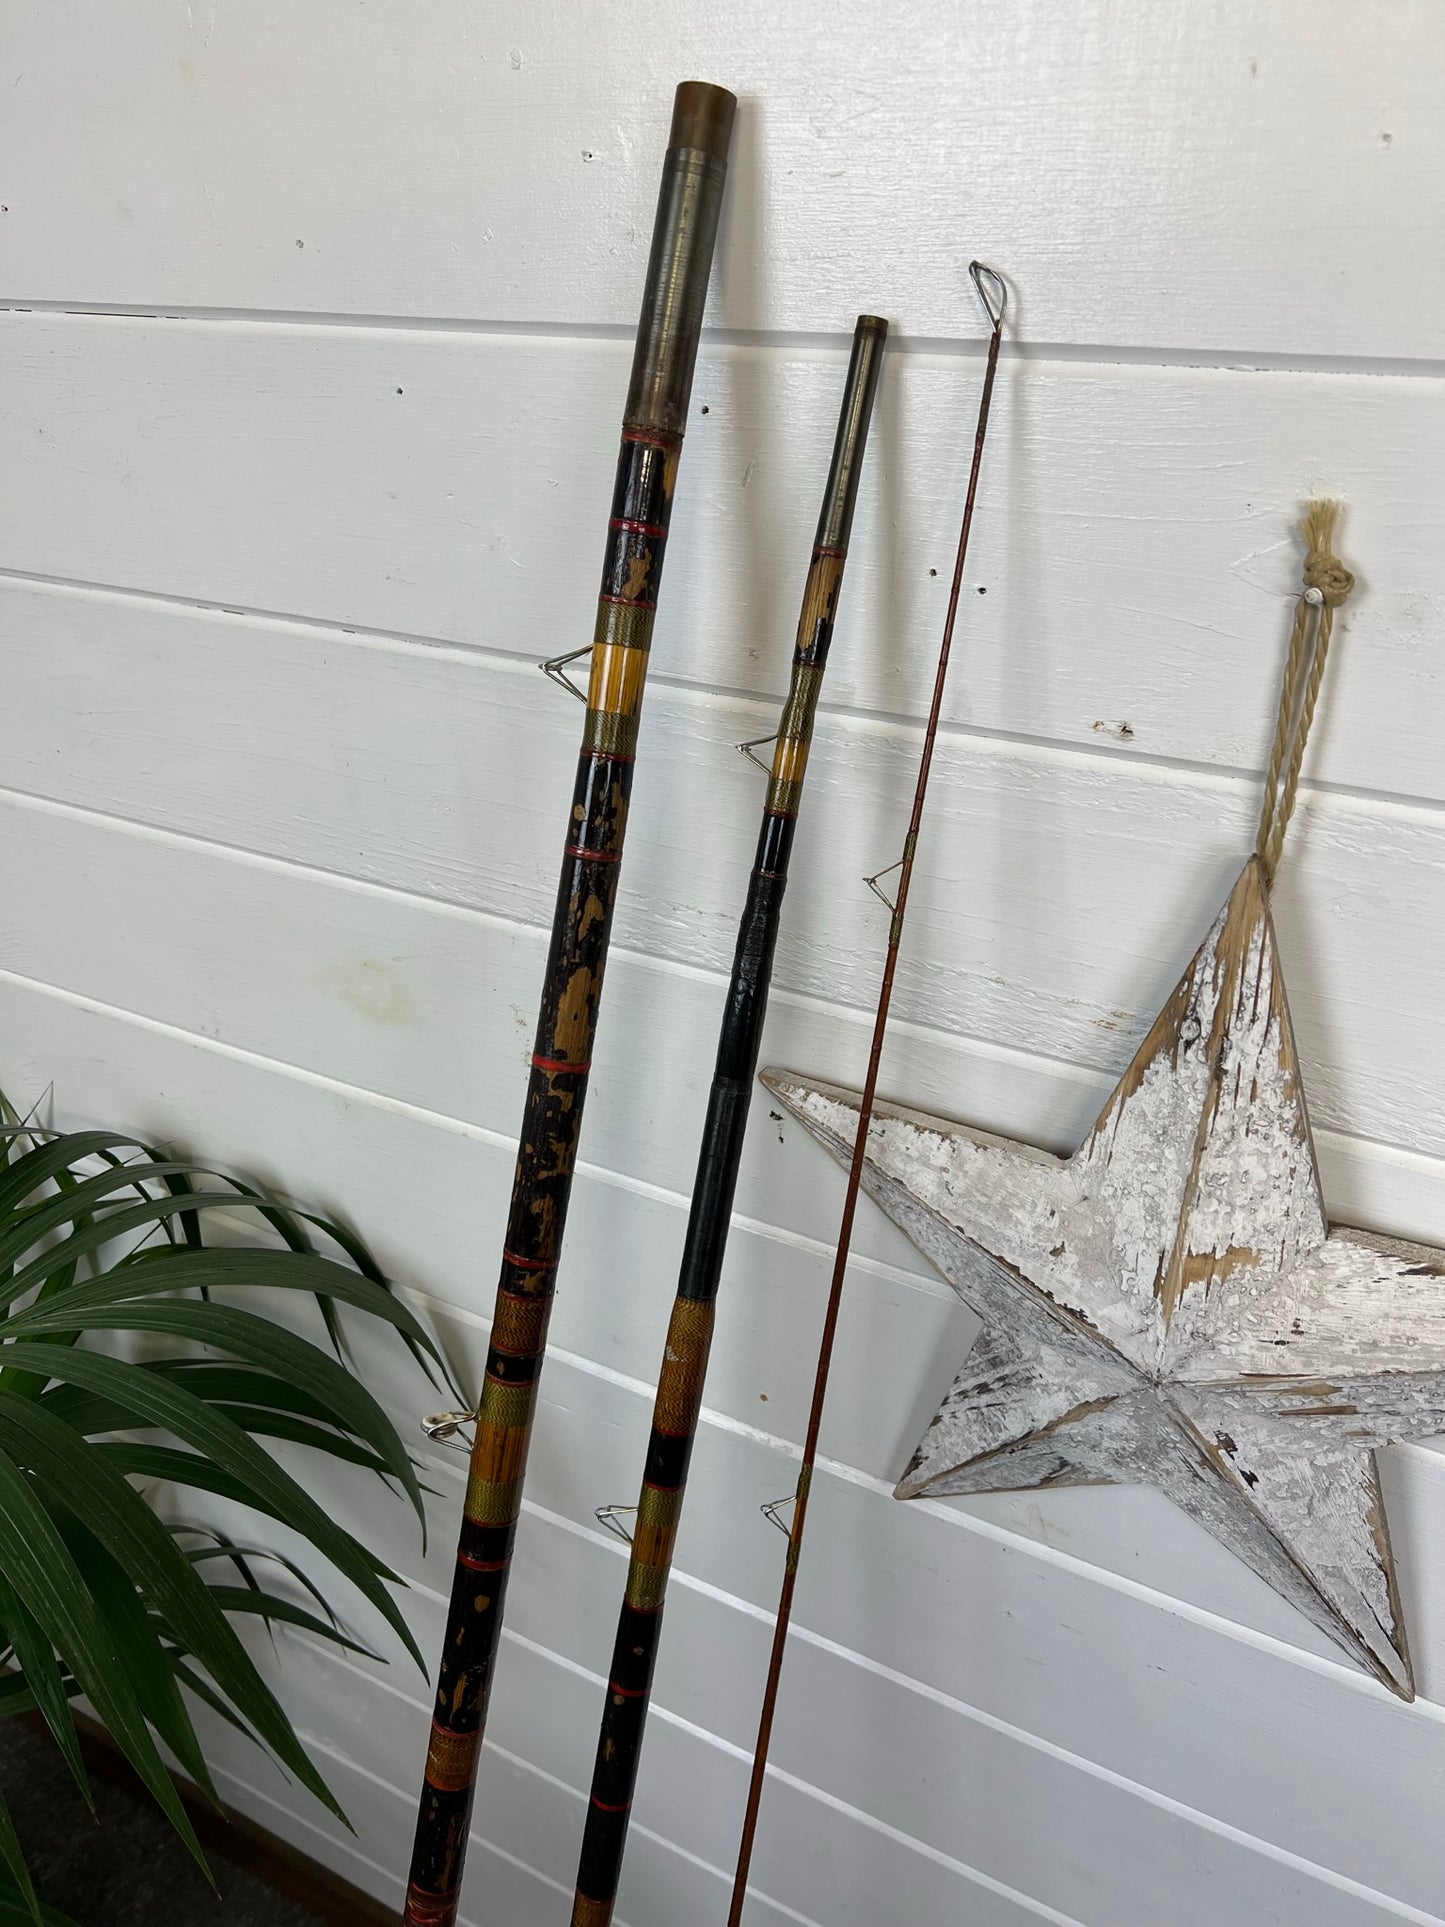 Vintage Split Cane Fishing Rod Made by Precision Rods - Fishing Display Prop